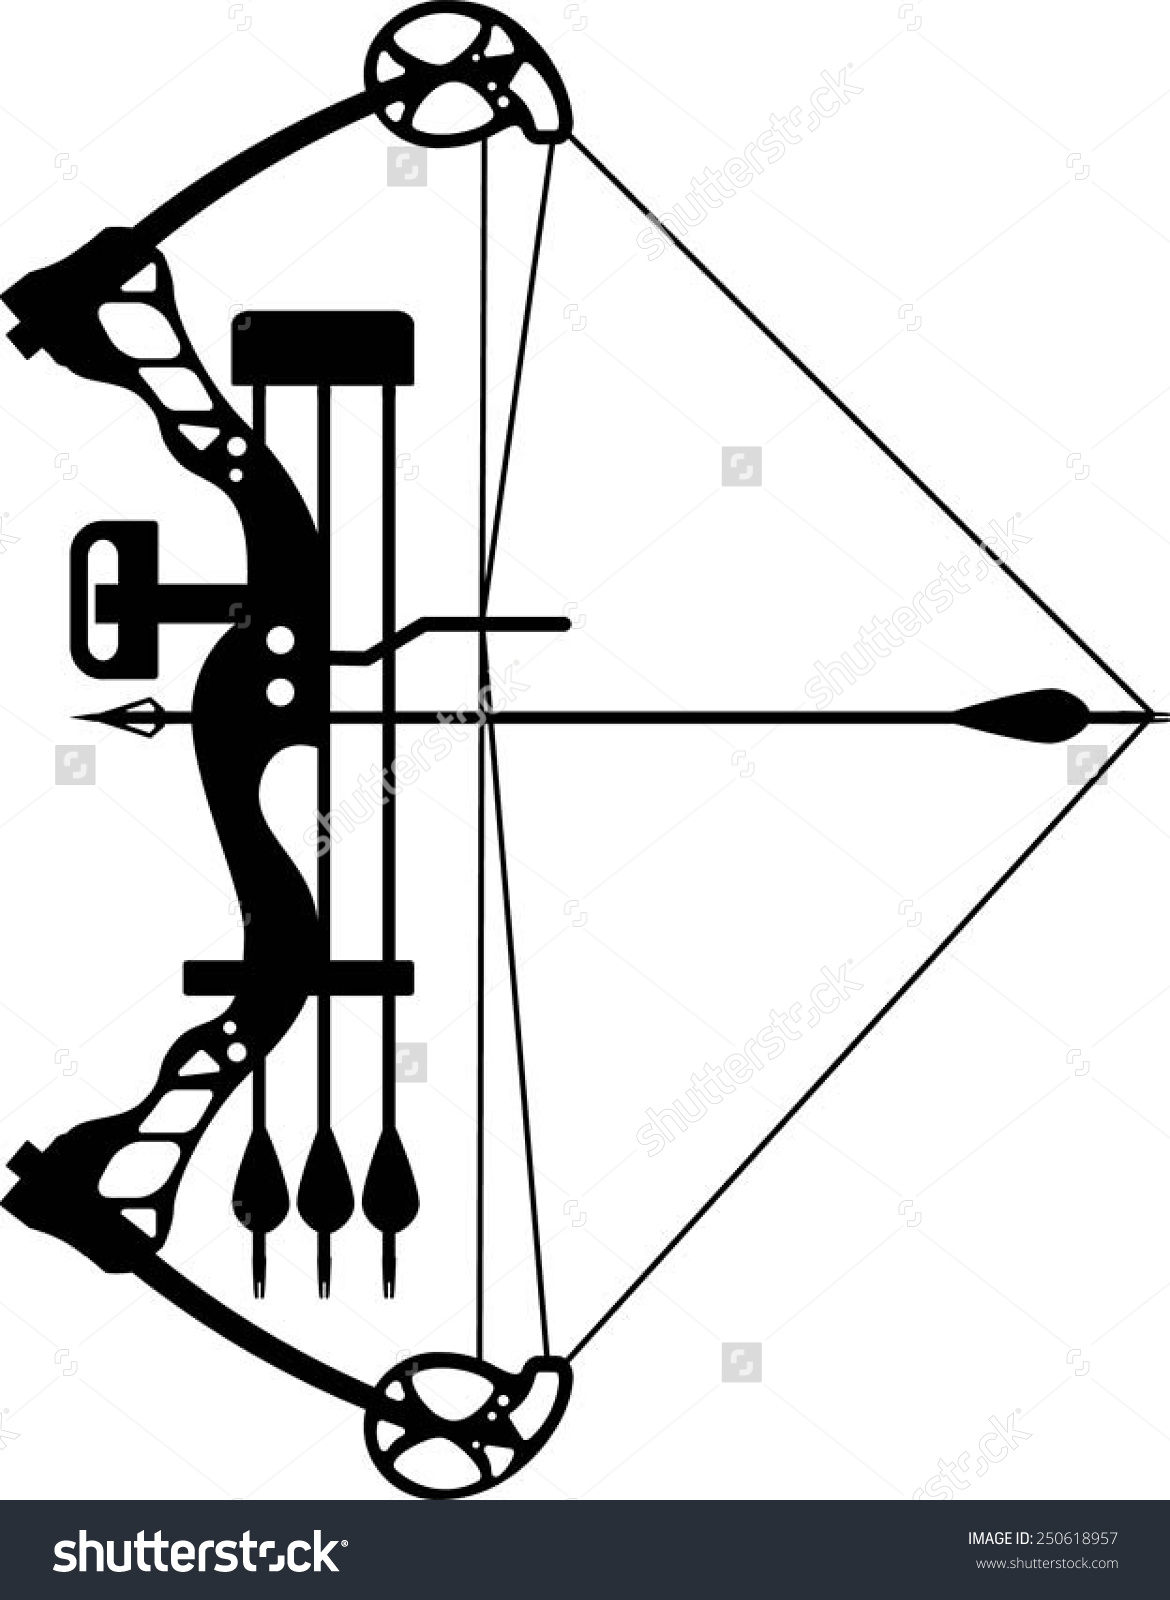 clipart compound bow - Clipground